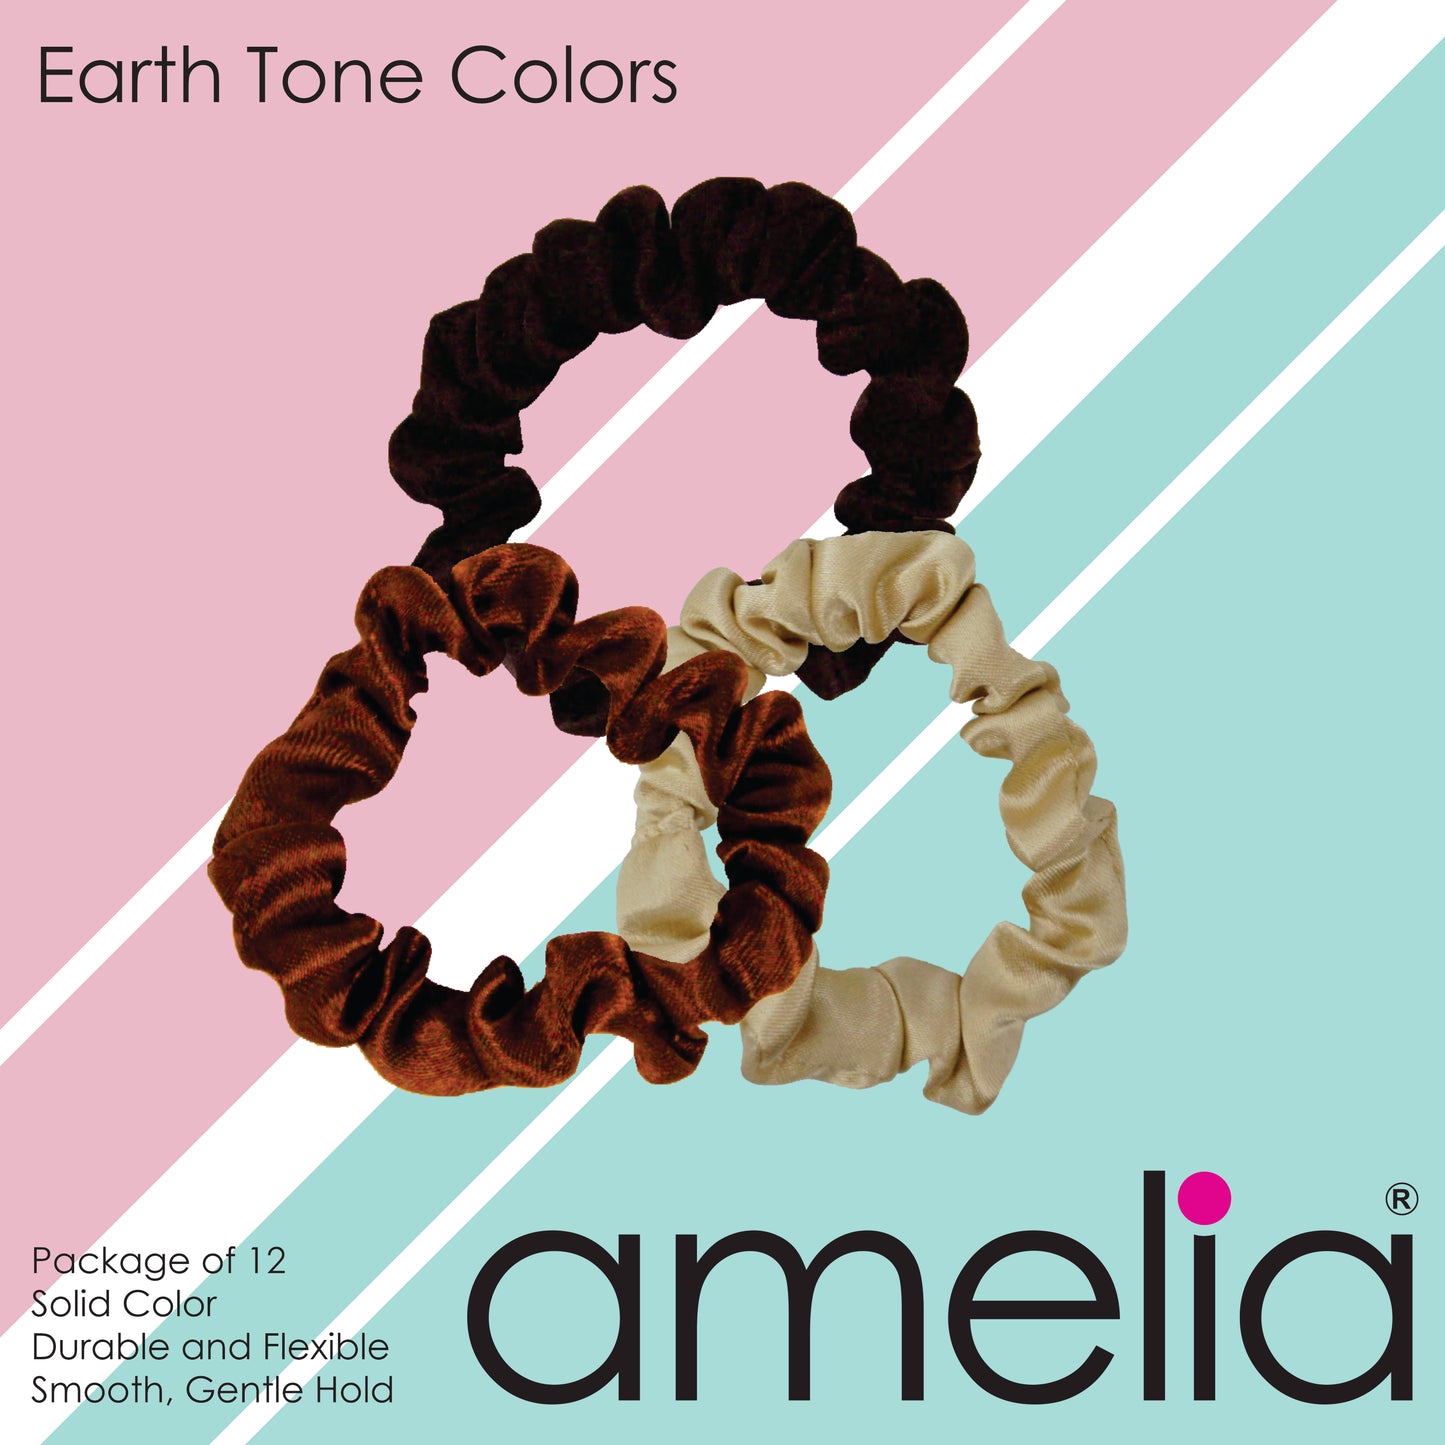 Amelia Beauty, Earth Tones Satin Scrunchies, 2.25in Diameter, Gentle on Hair, Strong Hold, No Snag, No Dents or Creases. 12 Pack